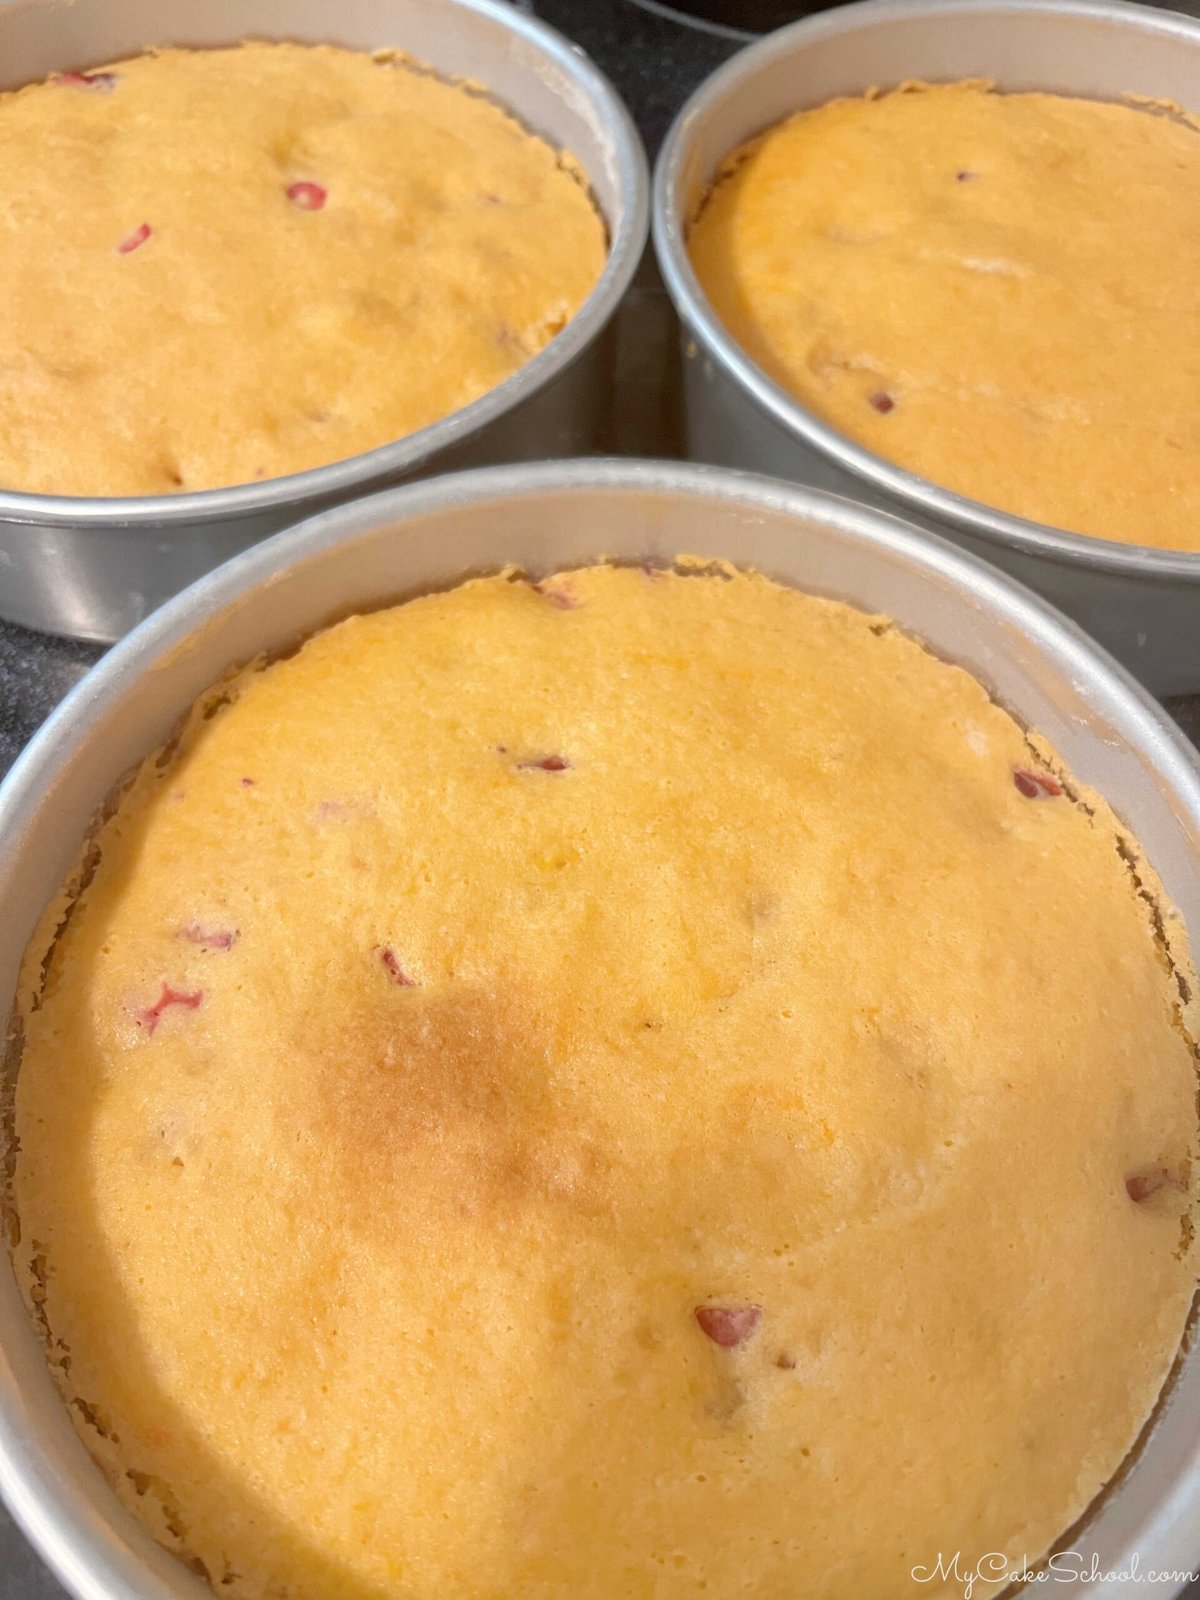 Freshly baked Orange Cranberry Cake layers, still in pans.